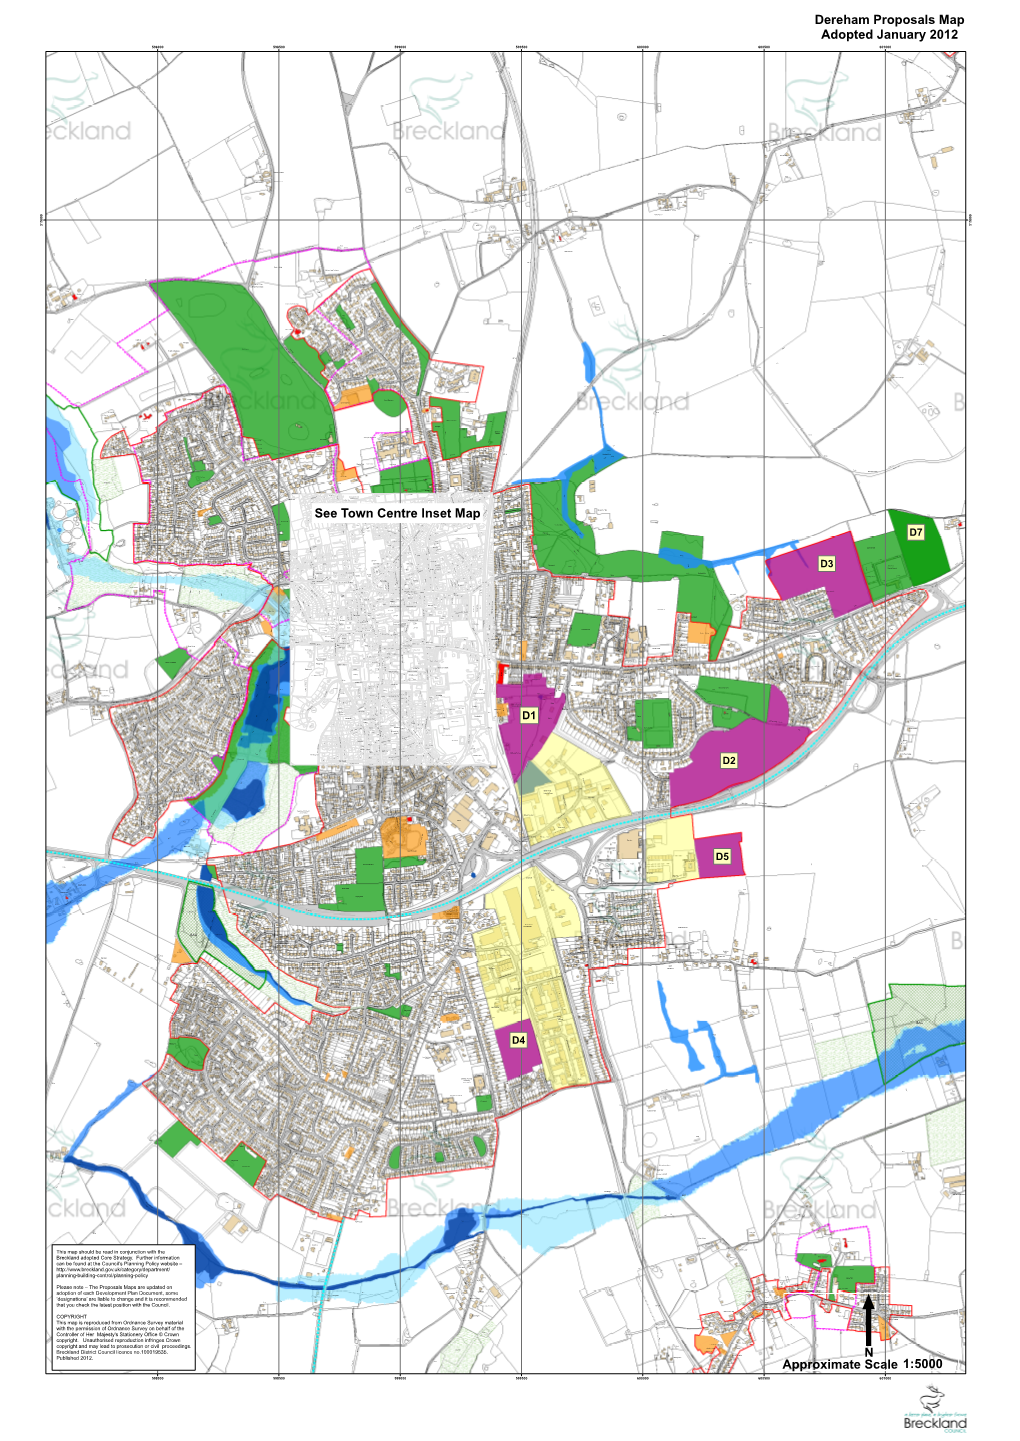 Dereham Proposals Map Adopted January 2012 598000 598500 599000 599500 600000 600500 601000